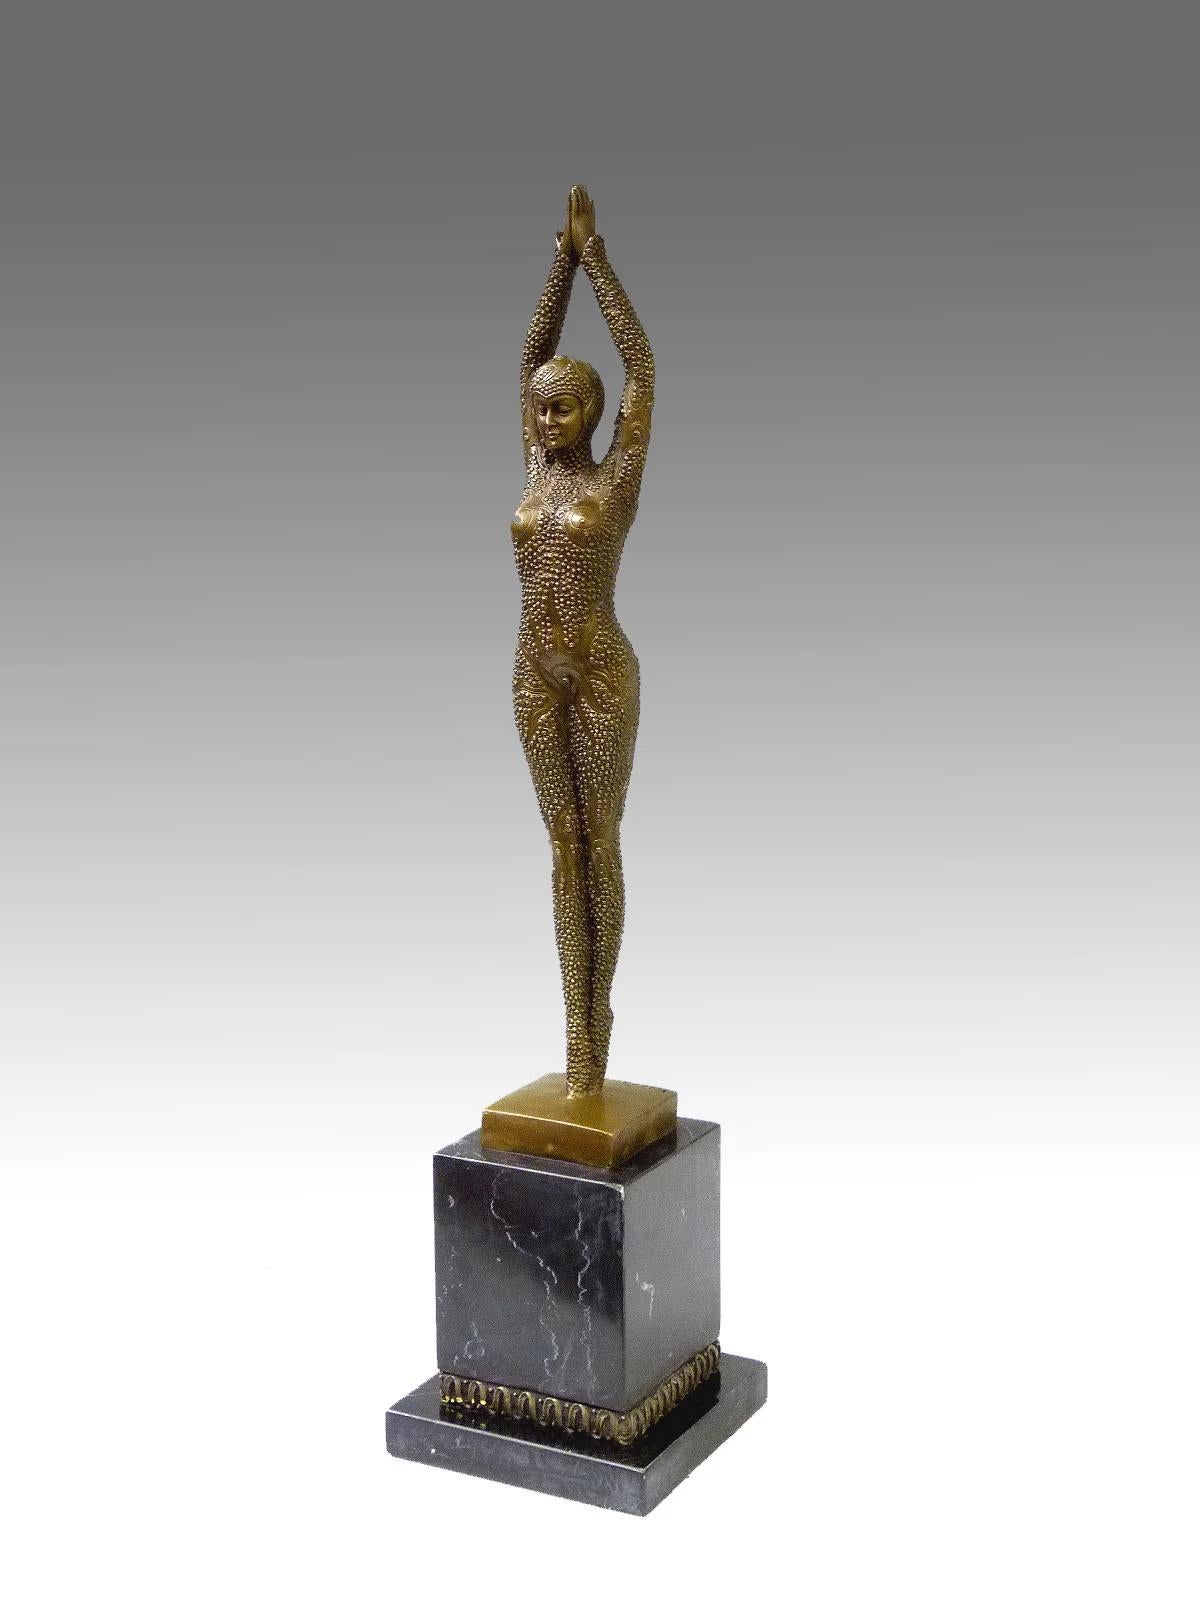 Sculpture in patinated bronze representing a dancer in the Art Deco style, signed D.H Chiparus, Modern Edition, XXI century.

H: 49cm, W: 11cm, D: 11cm